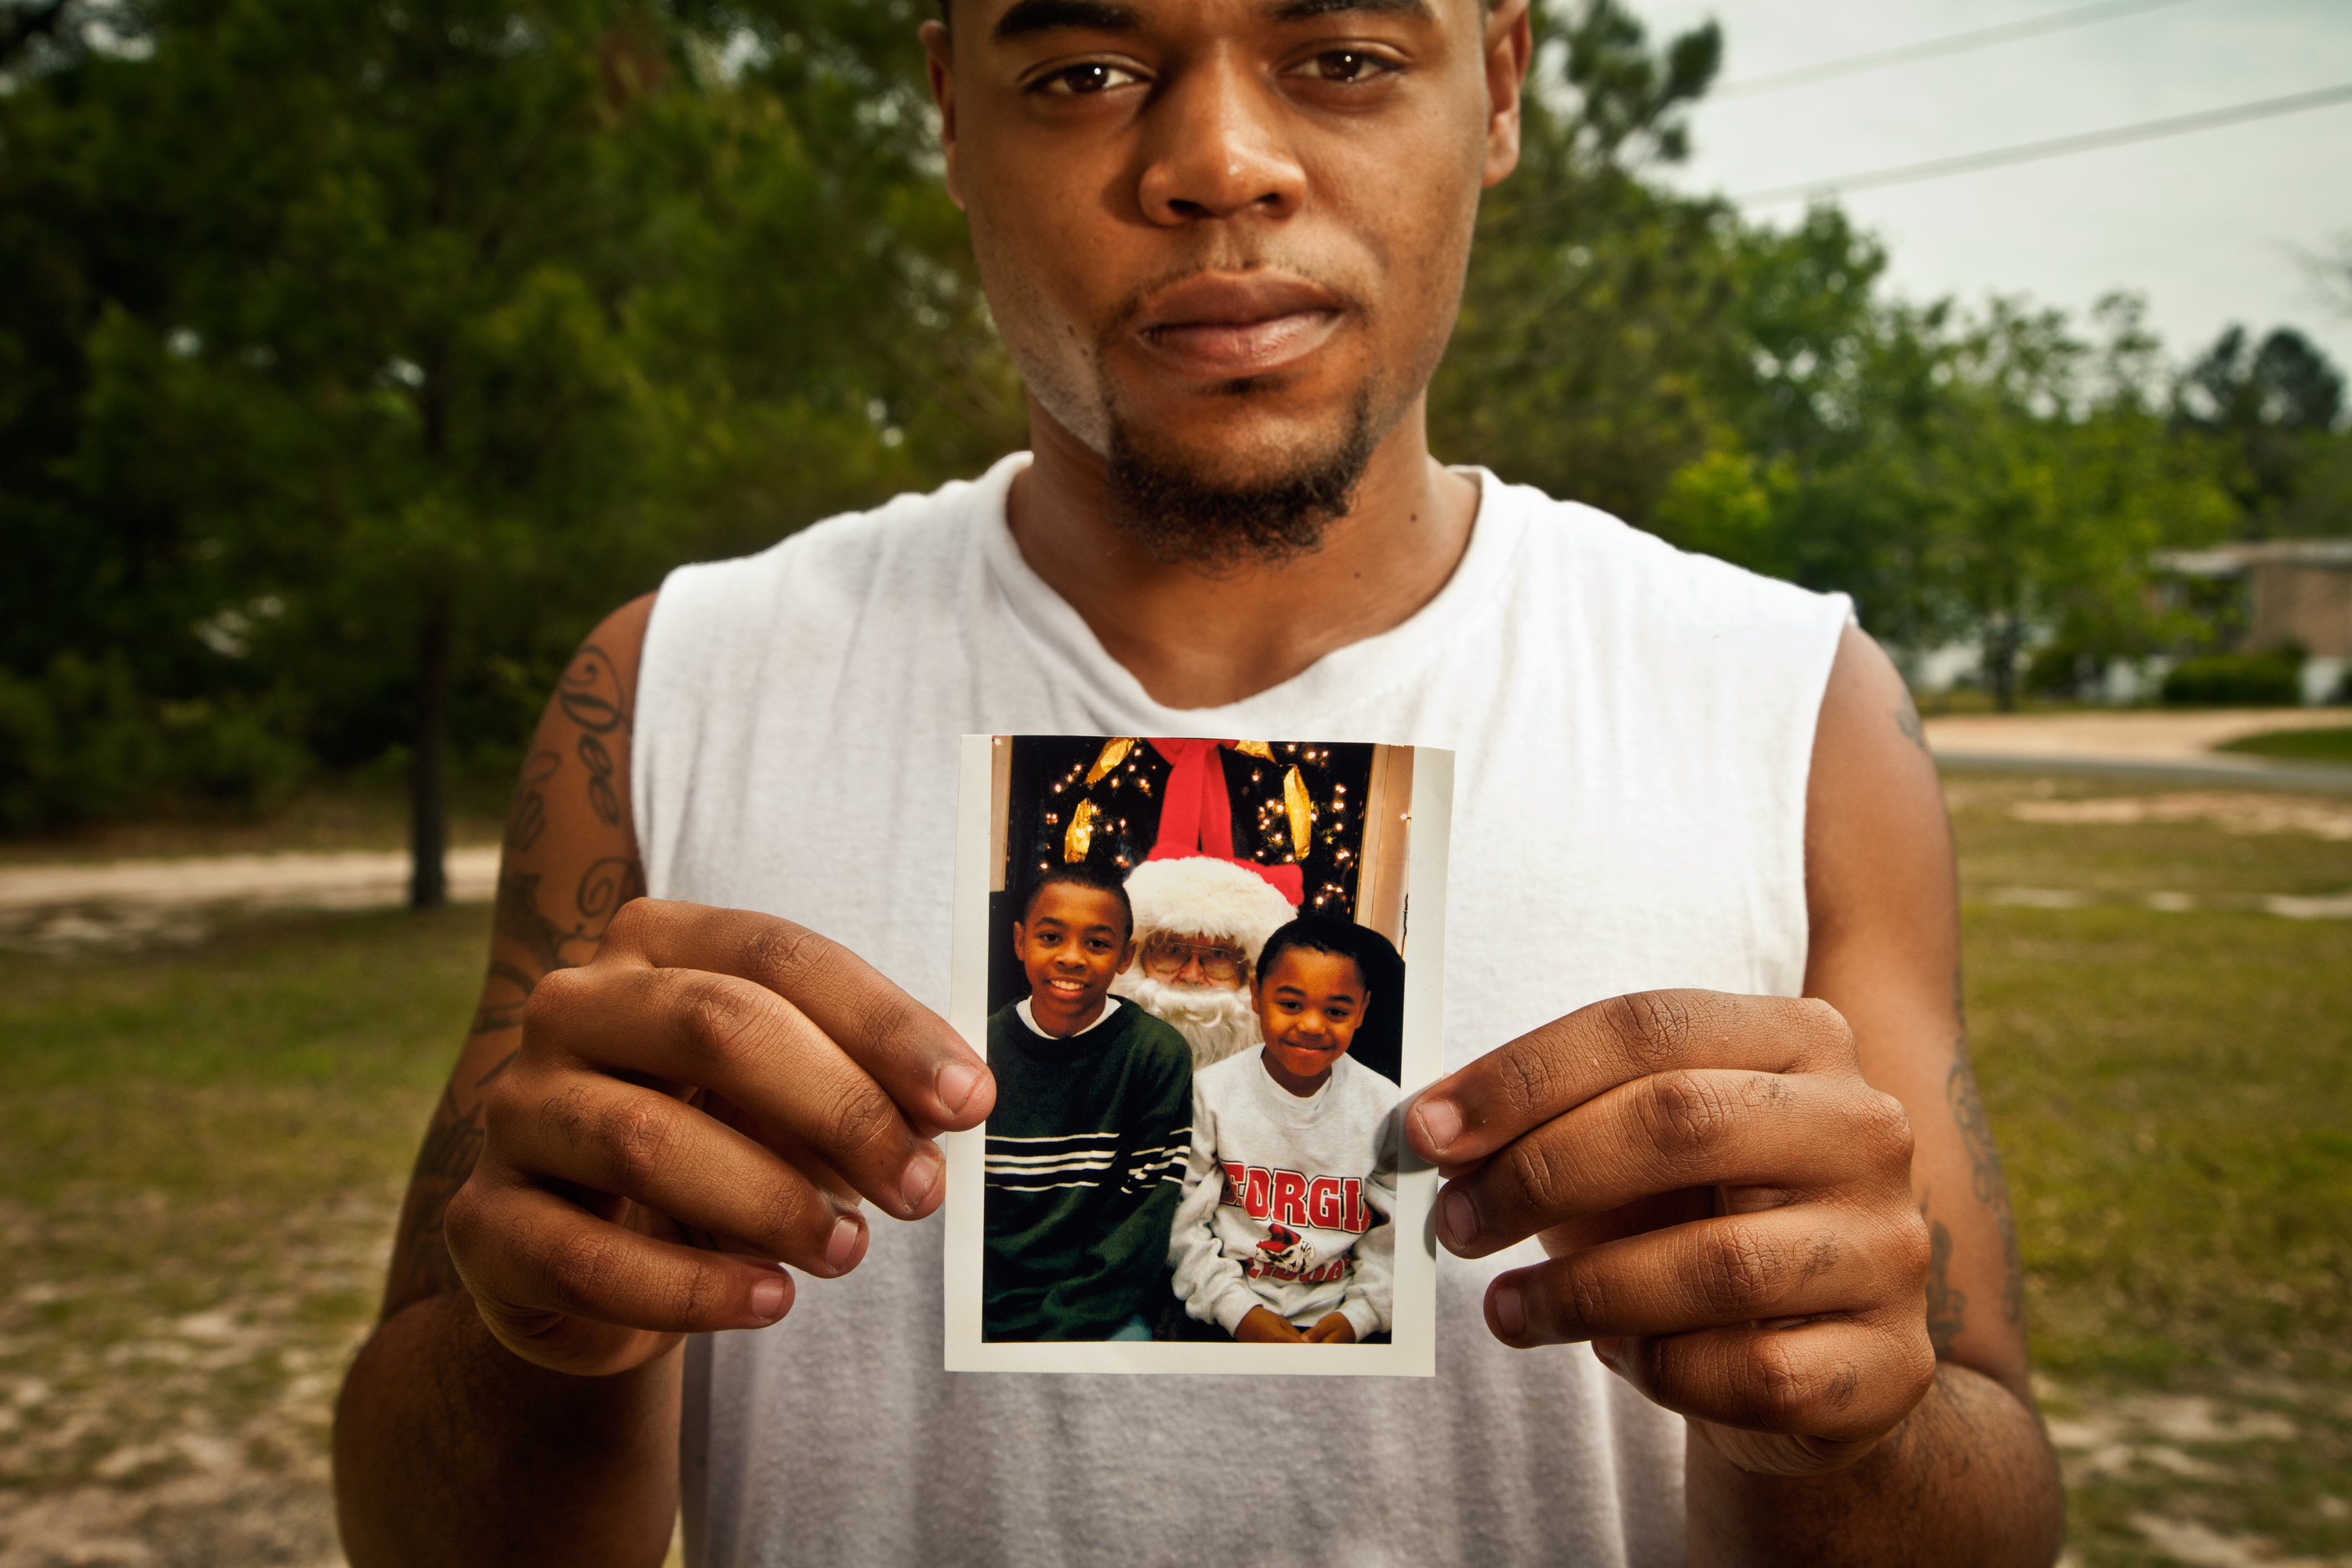 A man in a white tank top holding up a photograph of himself and his brother